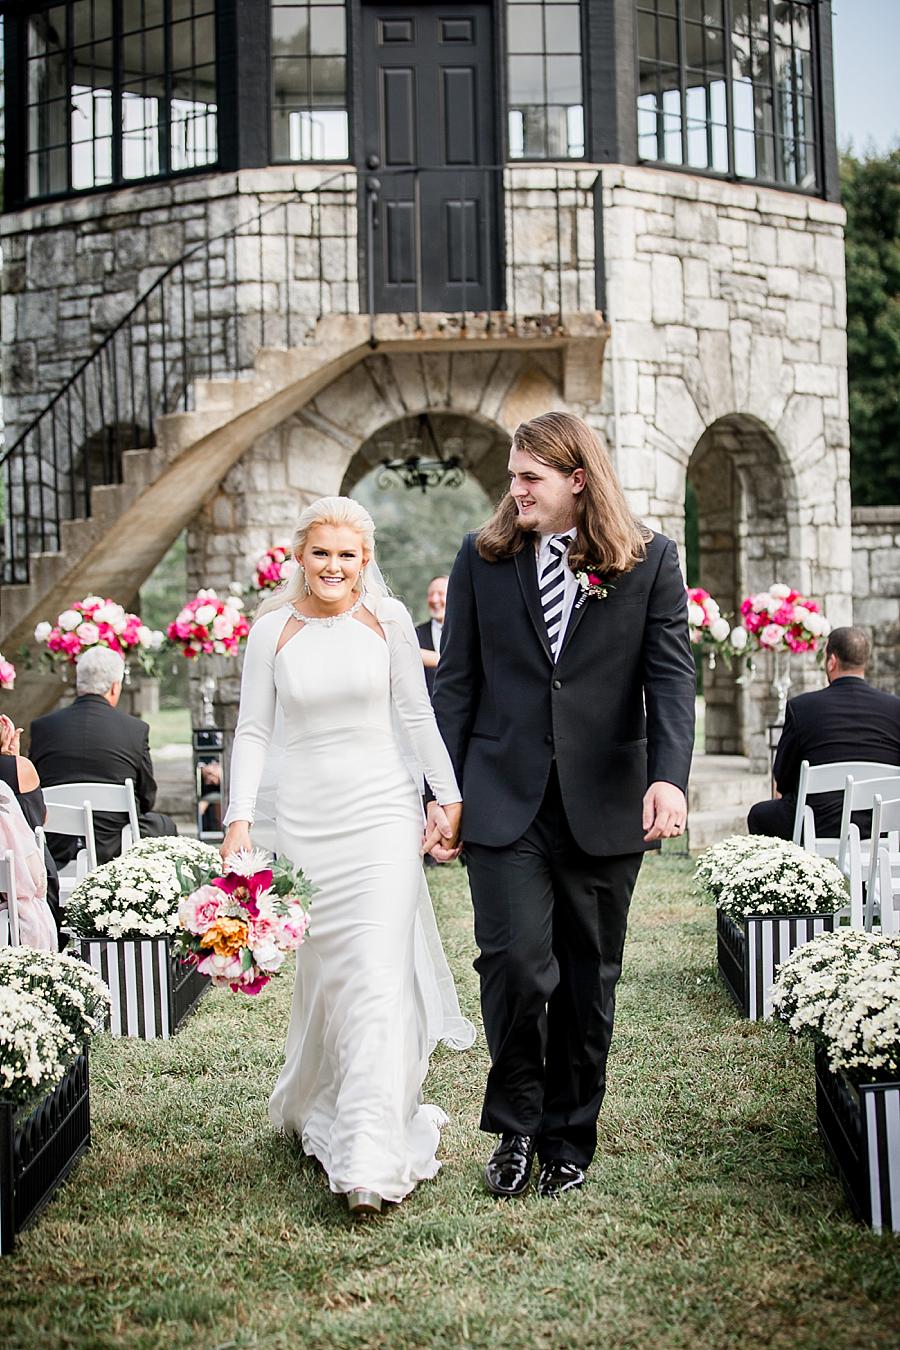 Recessional at this Kincaid House Wedding by Knoxville Wedding Photographer, Amanda May Photos.